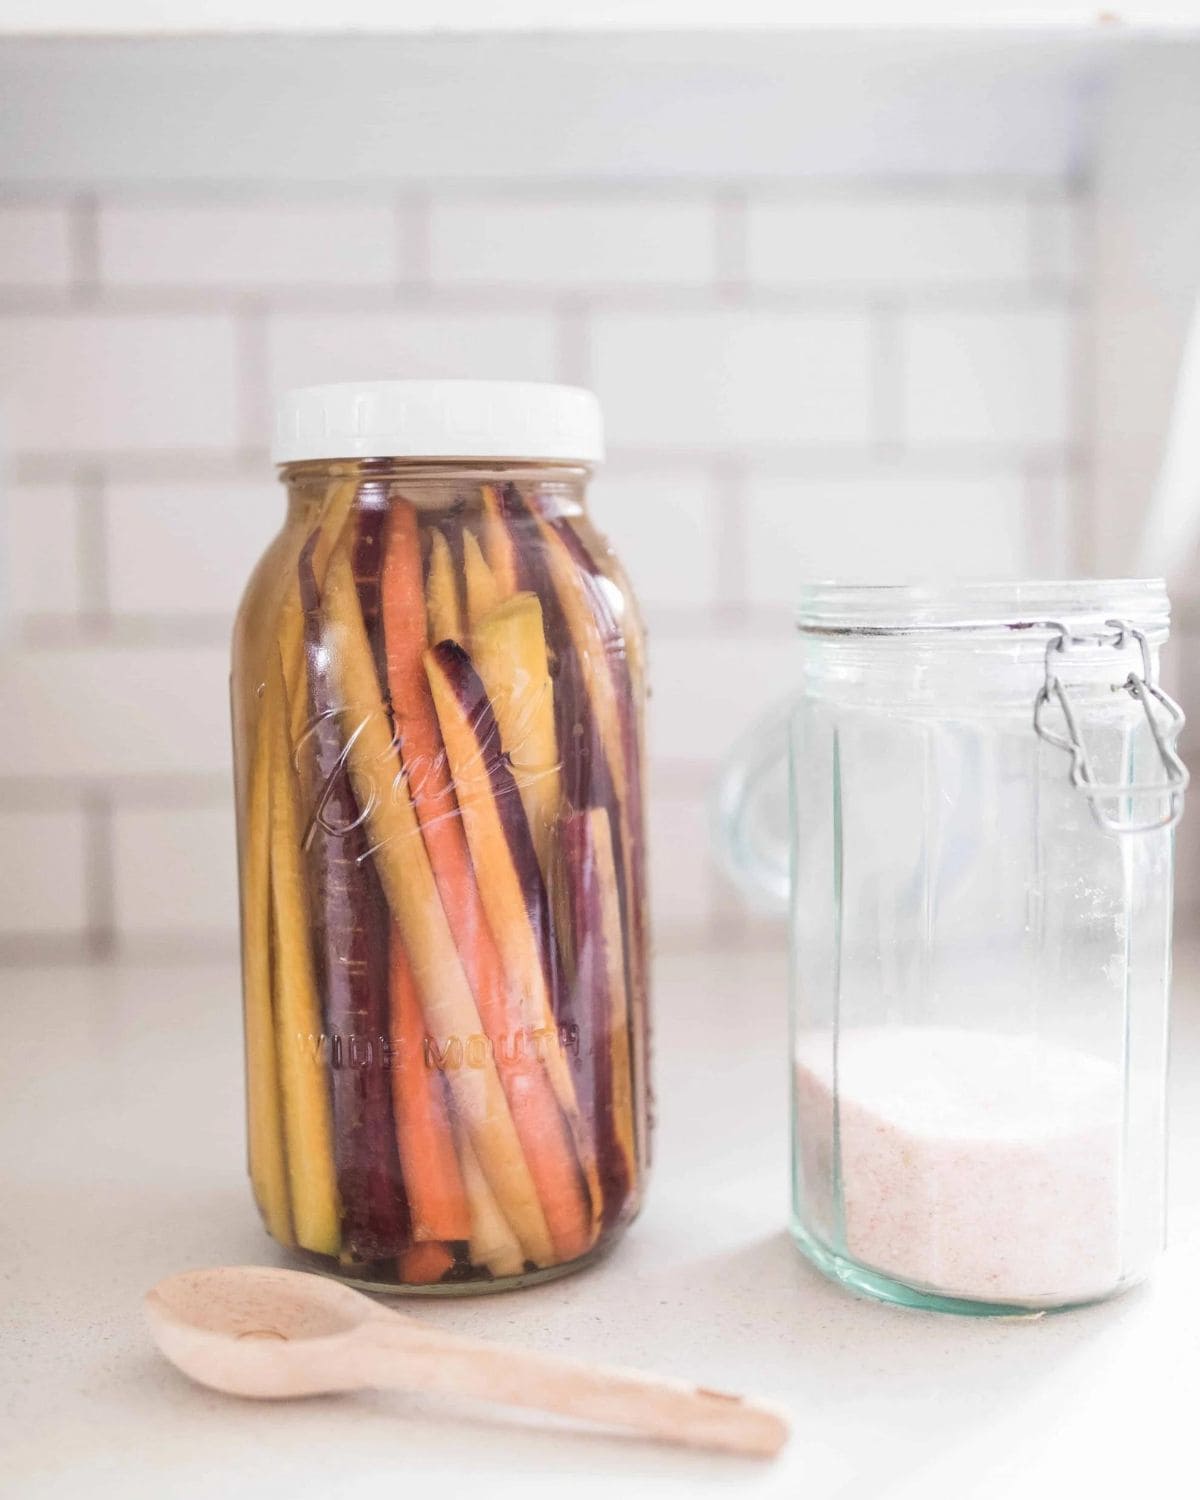 Large mason jar filled with tri-colored carrot sticks next to a jar of salt and a wooden spoon.